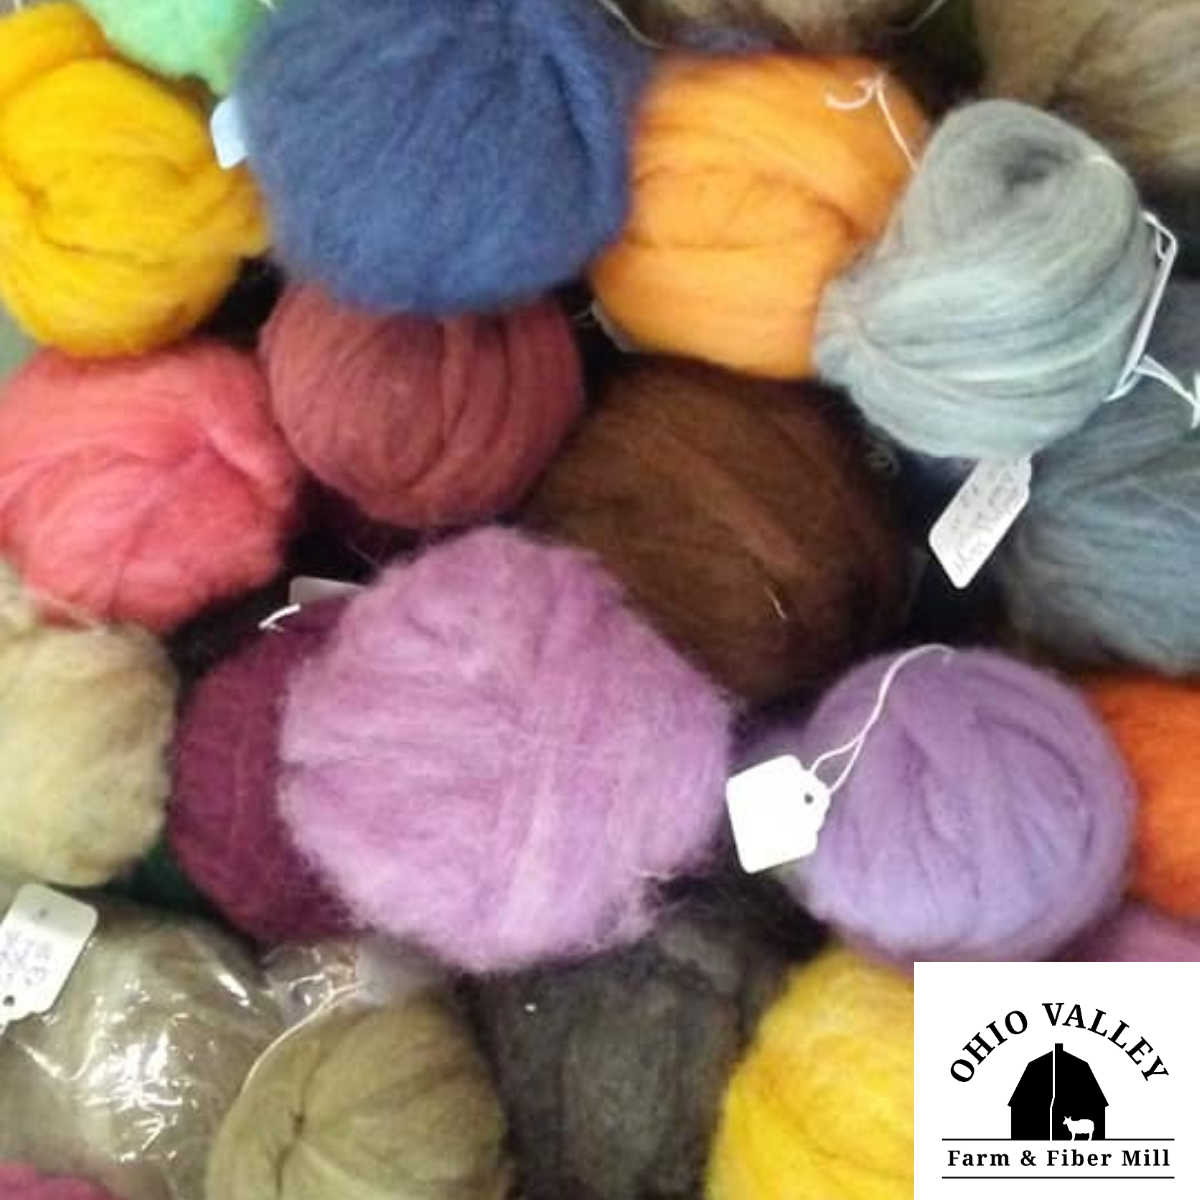 Ohio Valley Farm and Fiber sells roving, batting, exotic fibers and more at our General Store located in Peebles, Adams County, Ohio.